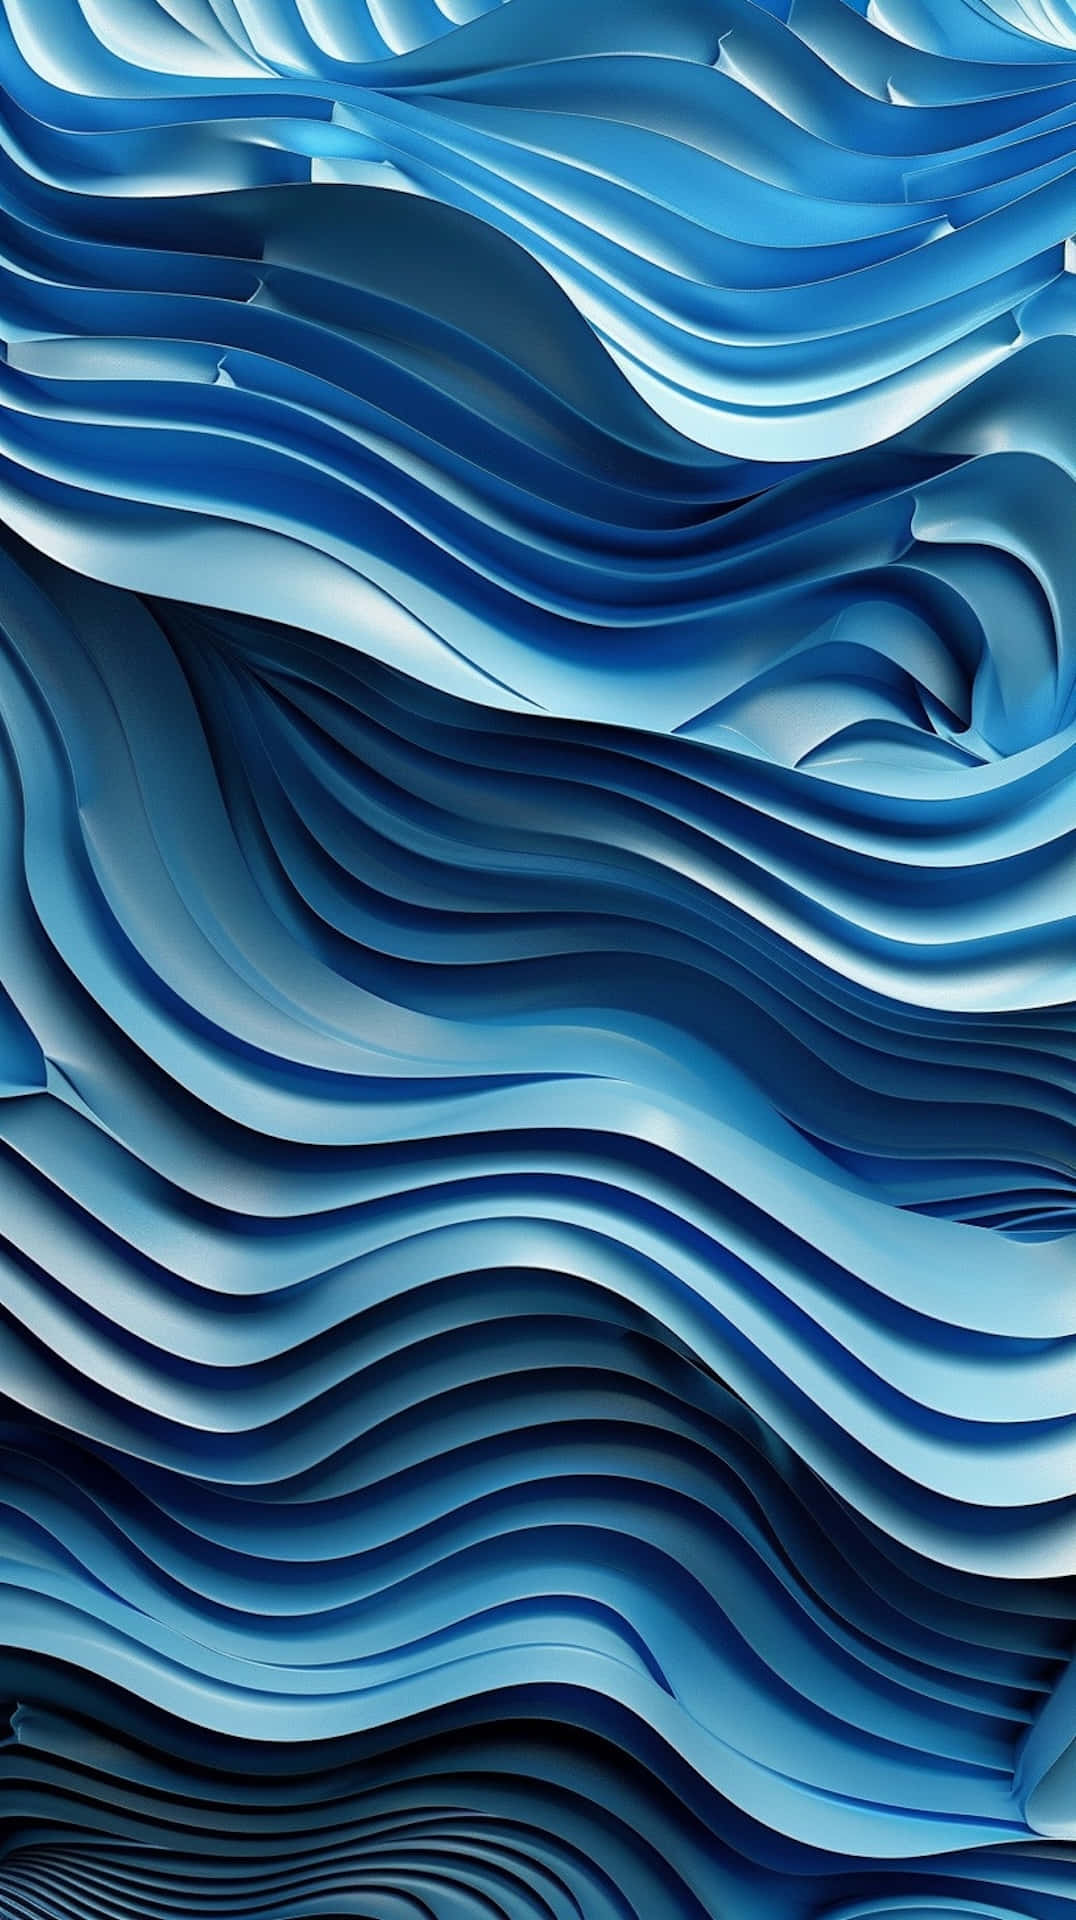 Abstract Blue Waves Texture Wallpaper